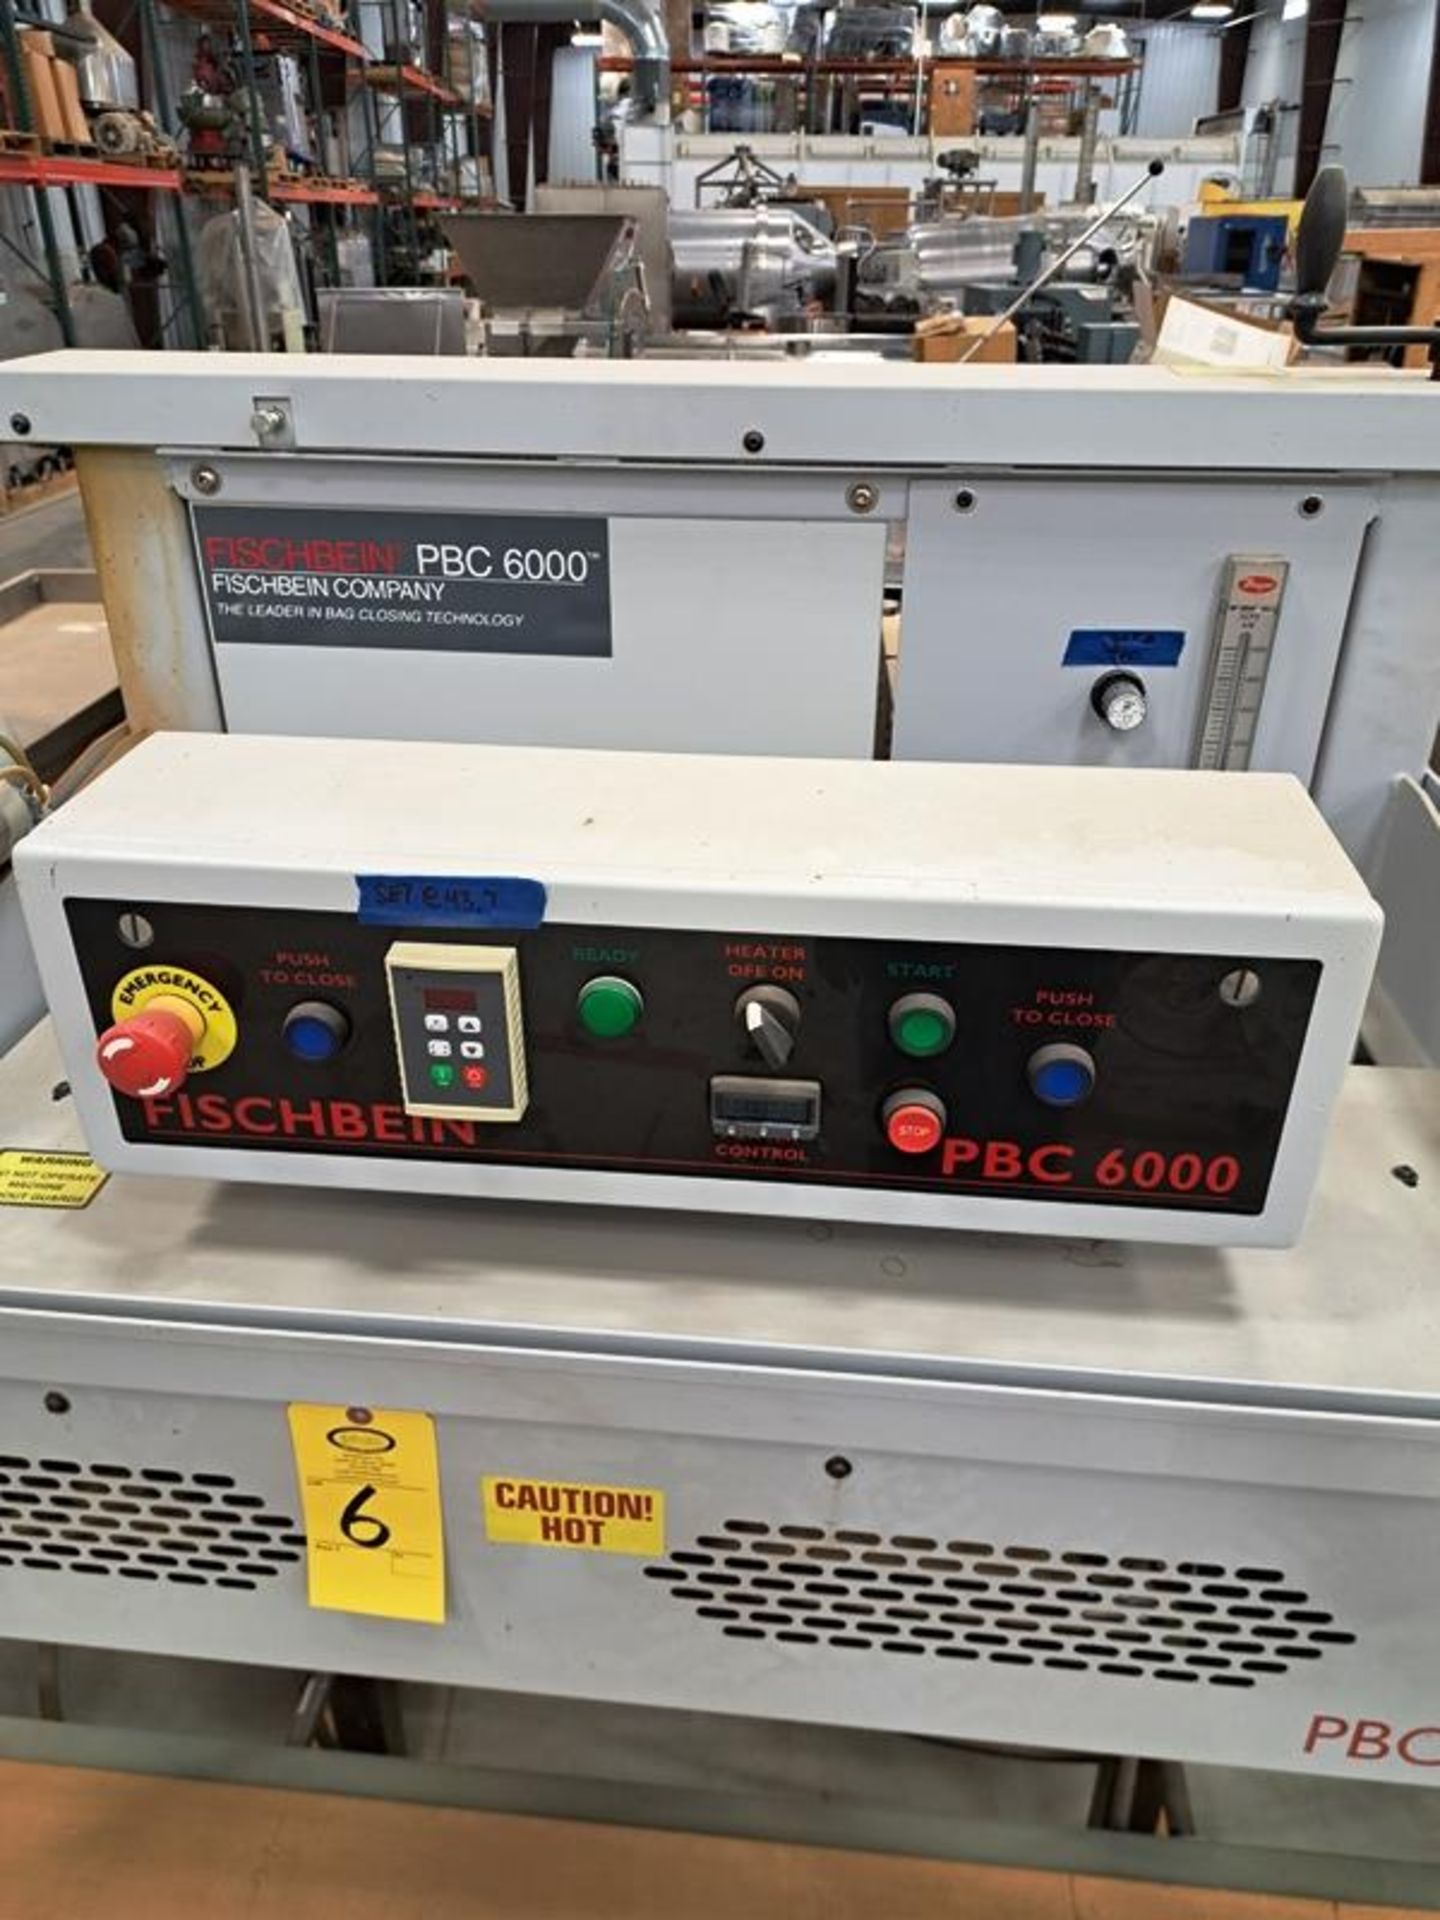 Fischbein Mdl. PBC6000 Continuous Band Sealer, manual controls, digital PBC151111101 readout, 12" - Image 6 of 9